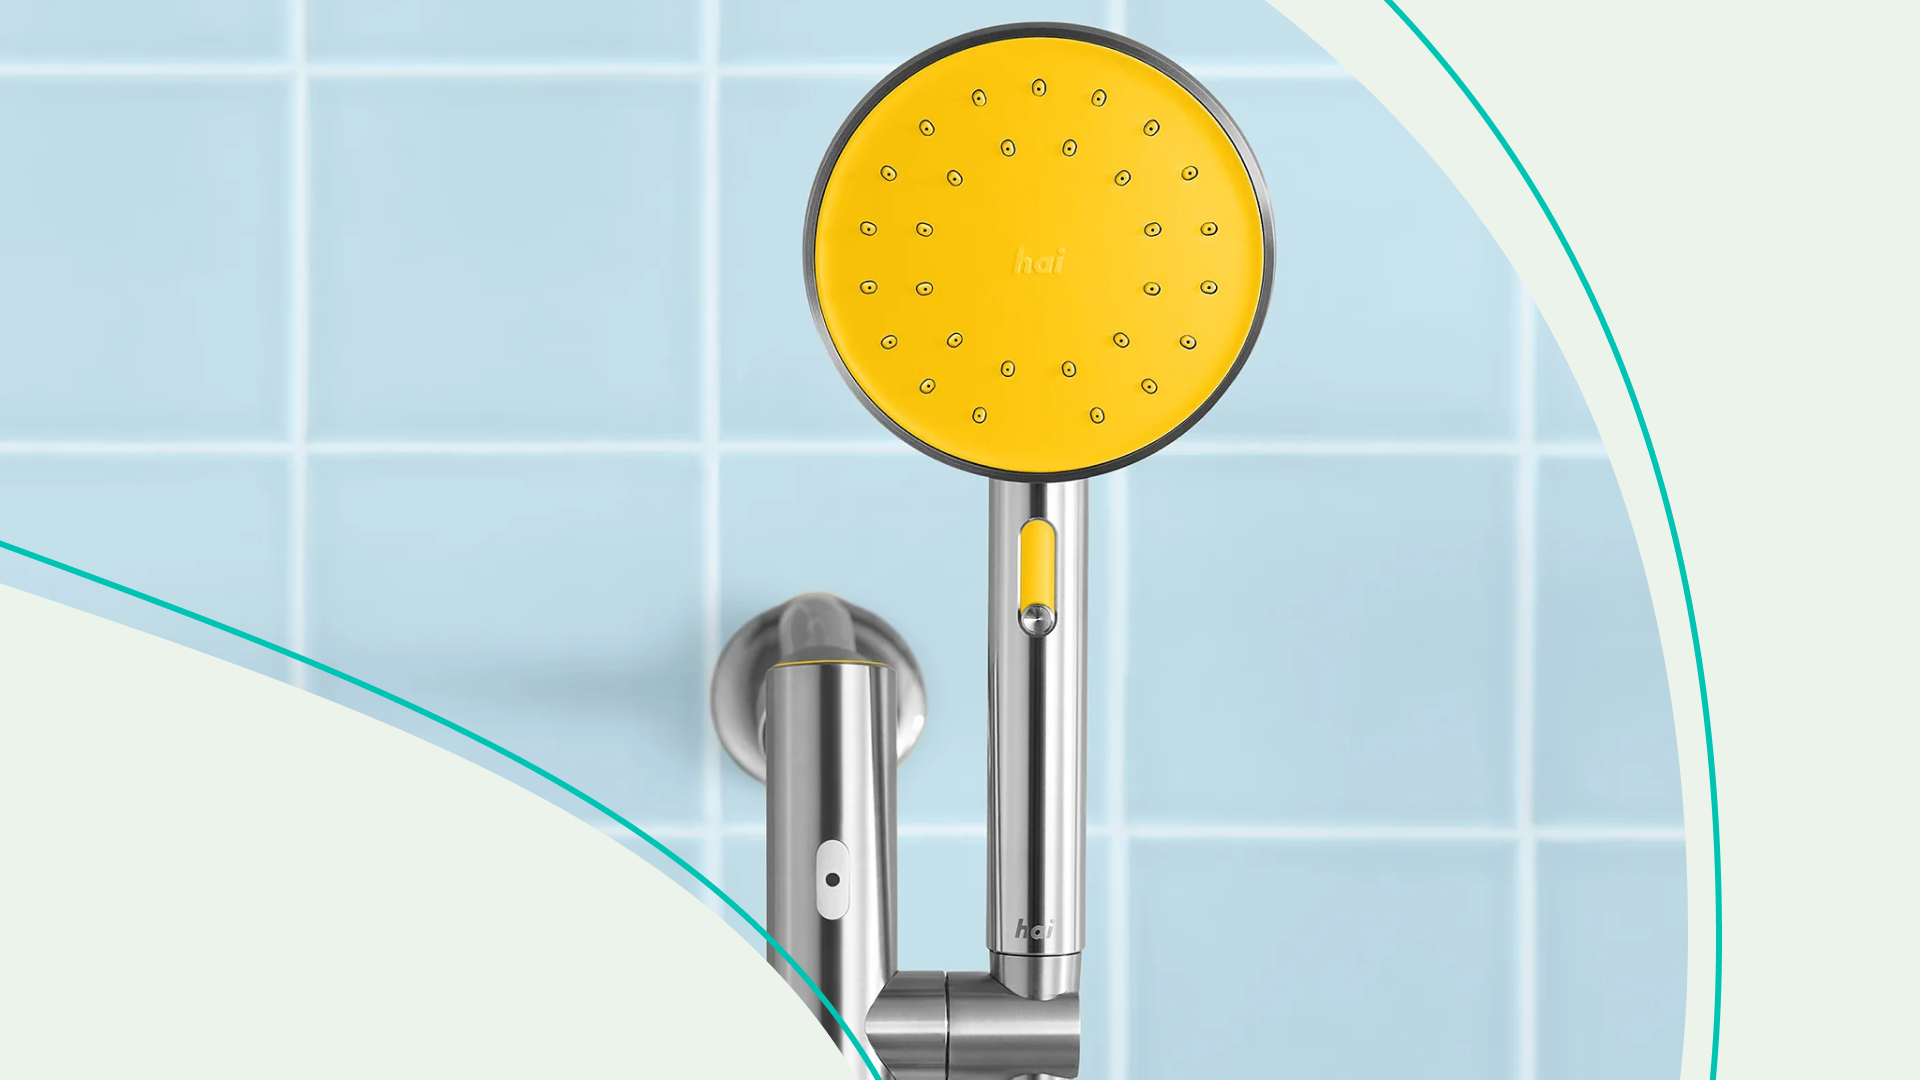 Bathroom Accessories That'll Upgrade Your Shower Experience